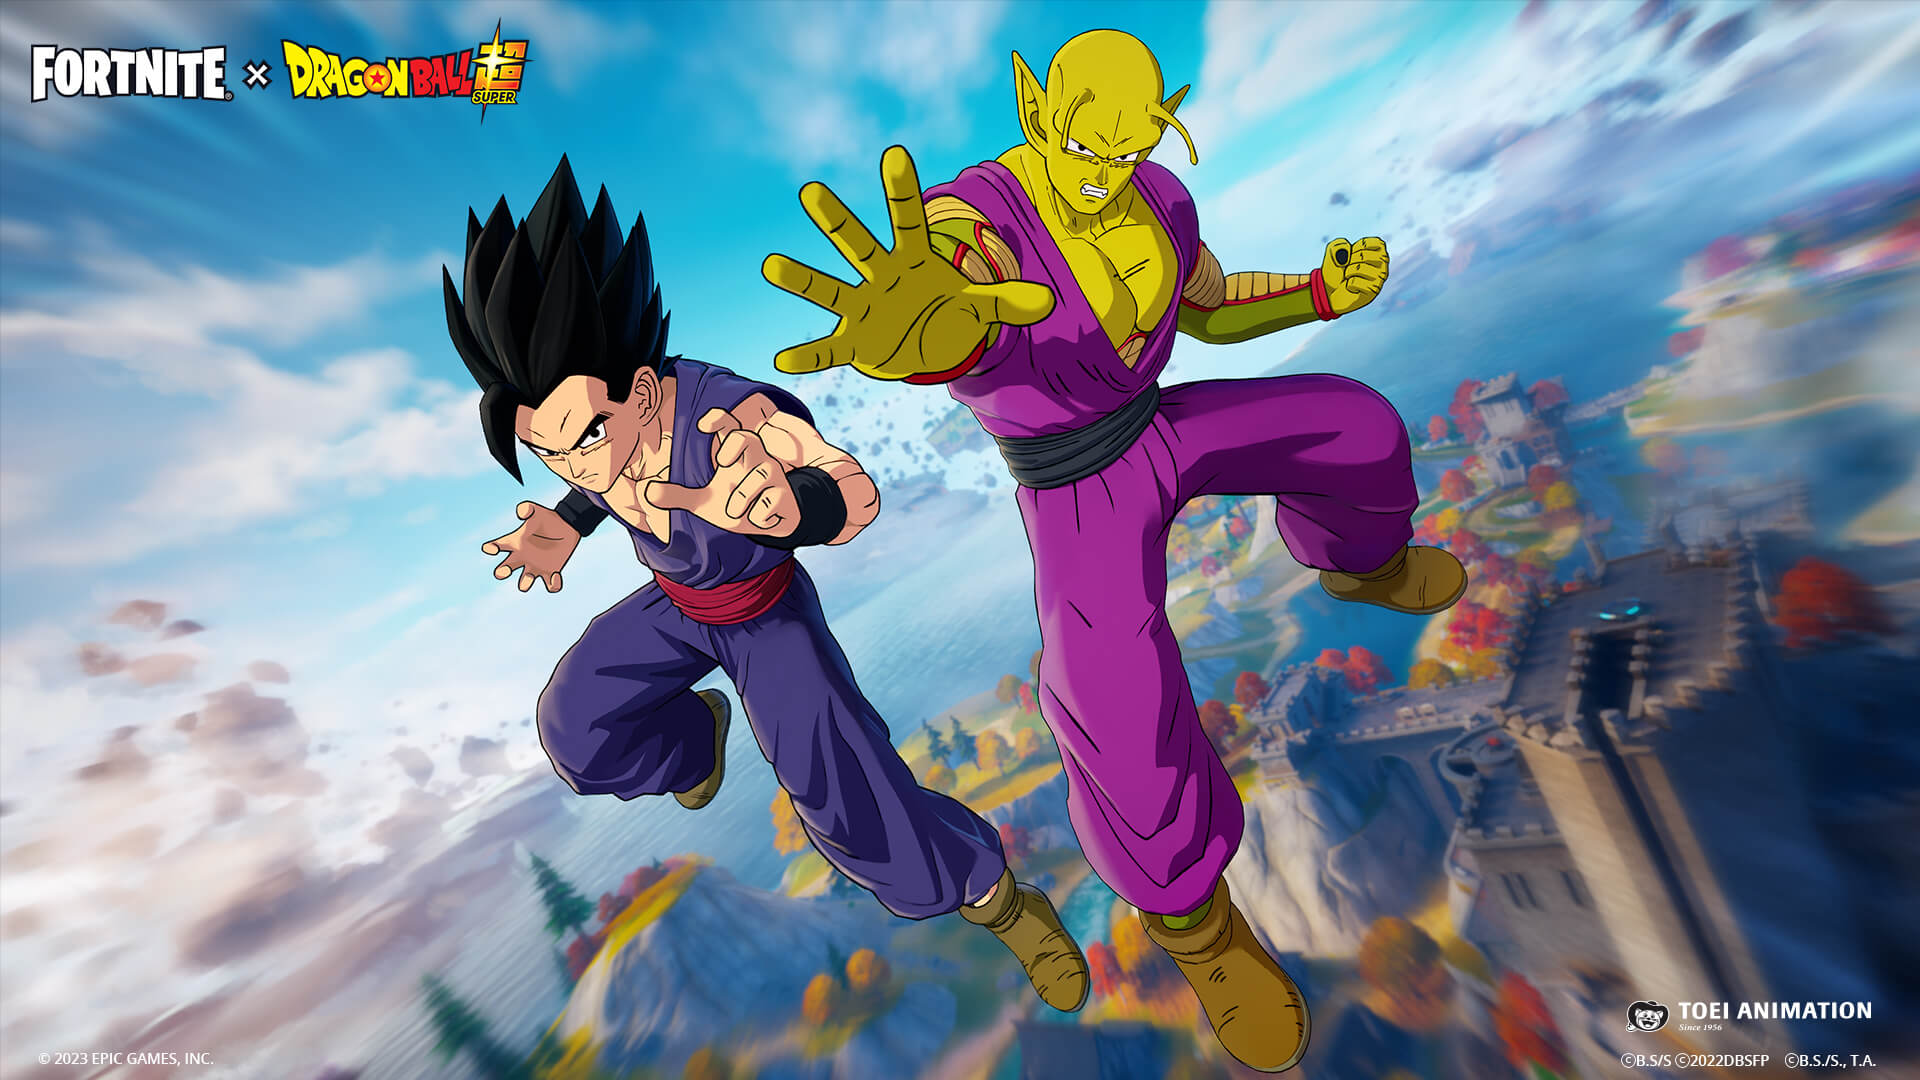 Fortnite's next Dragon Ball Super event introduces Gohan and Piccolo